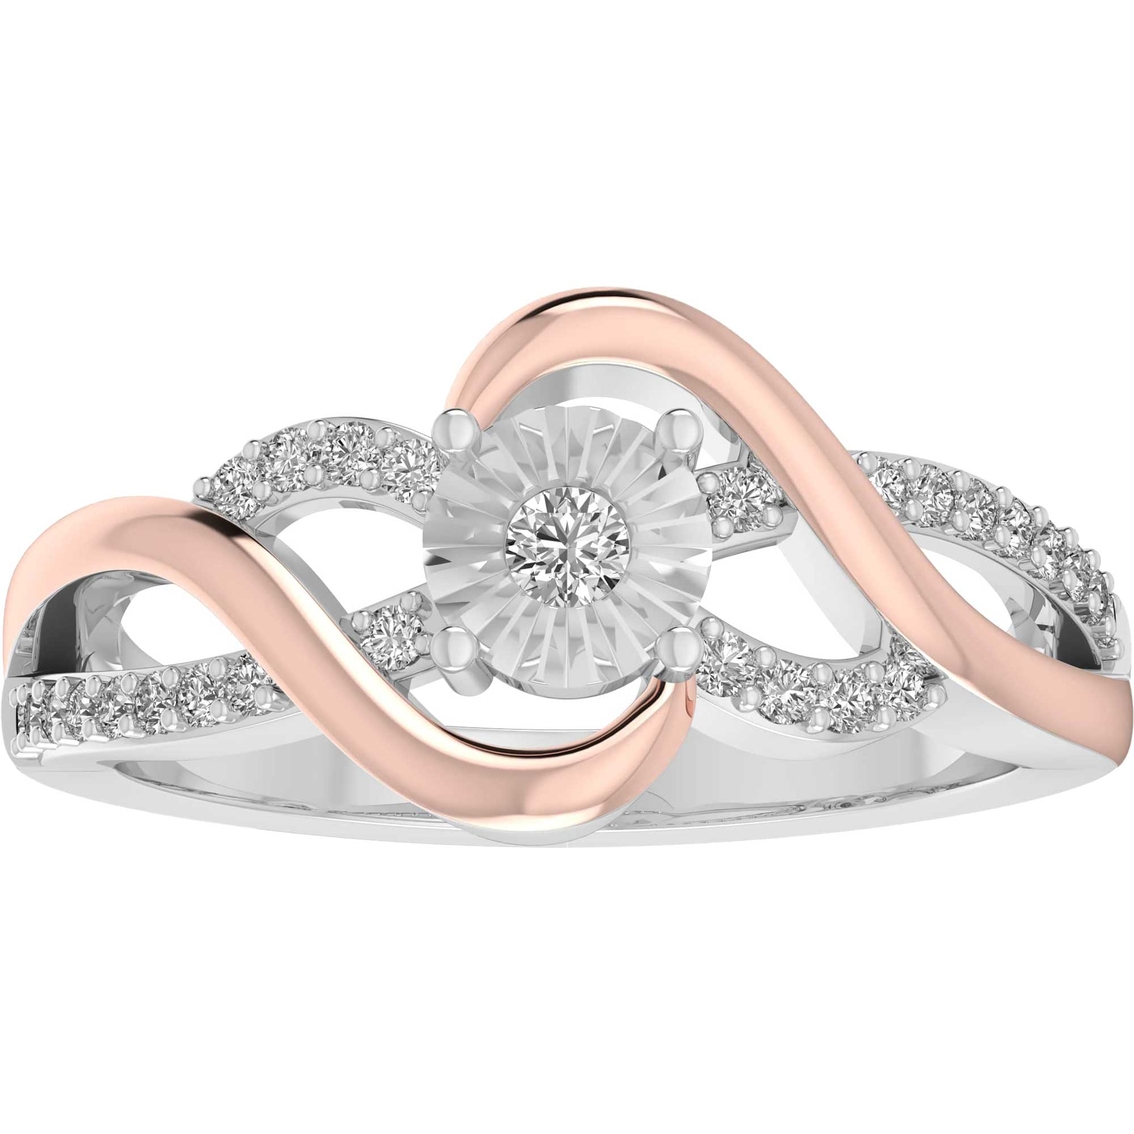 10K Rose Gold Over Sterling Silver 1/5 CTW Diamond Promise Ring Size 7